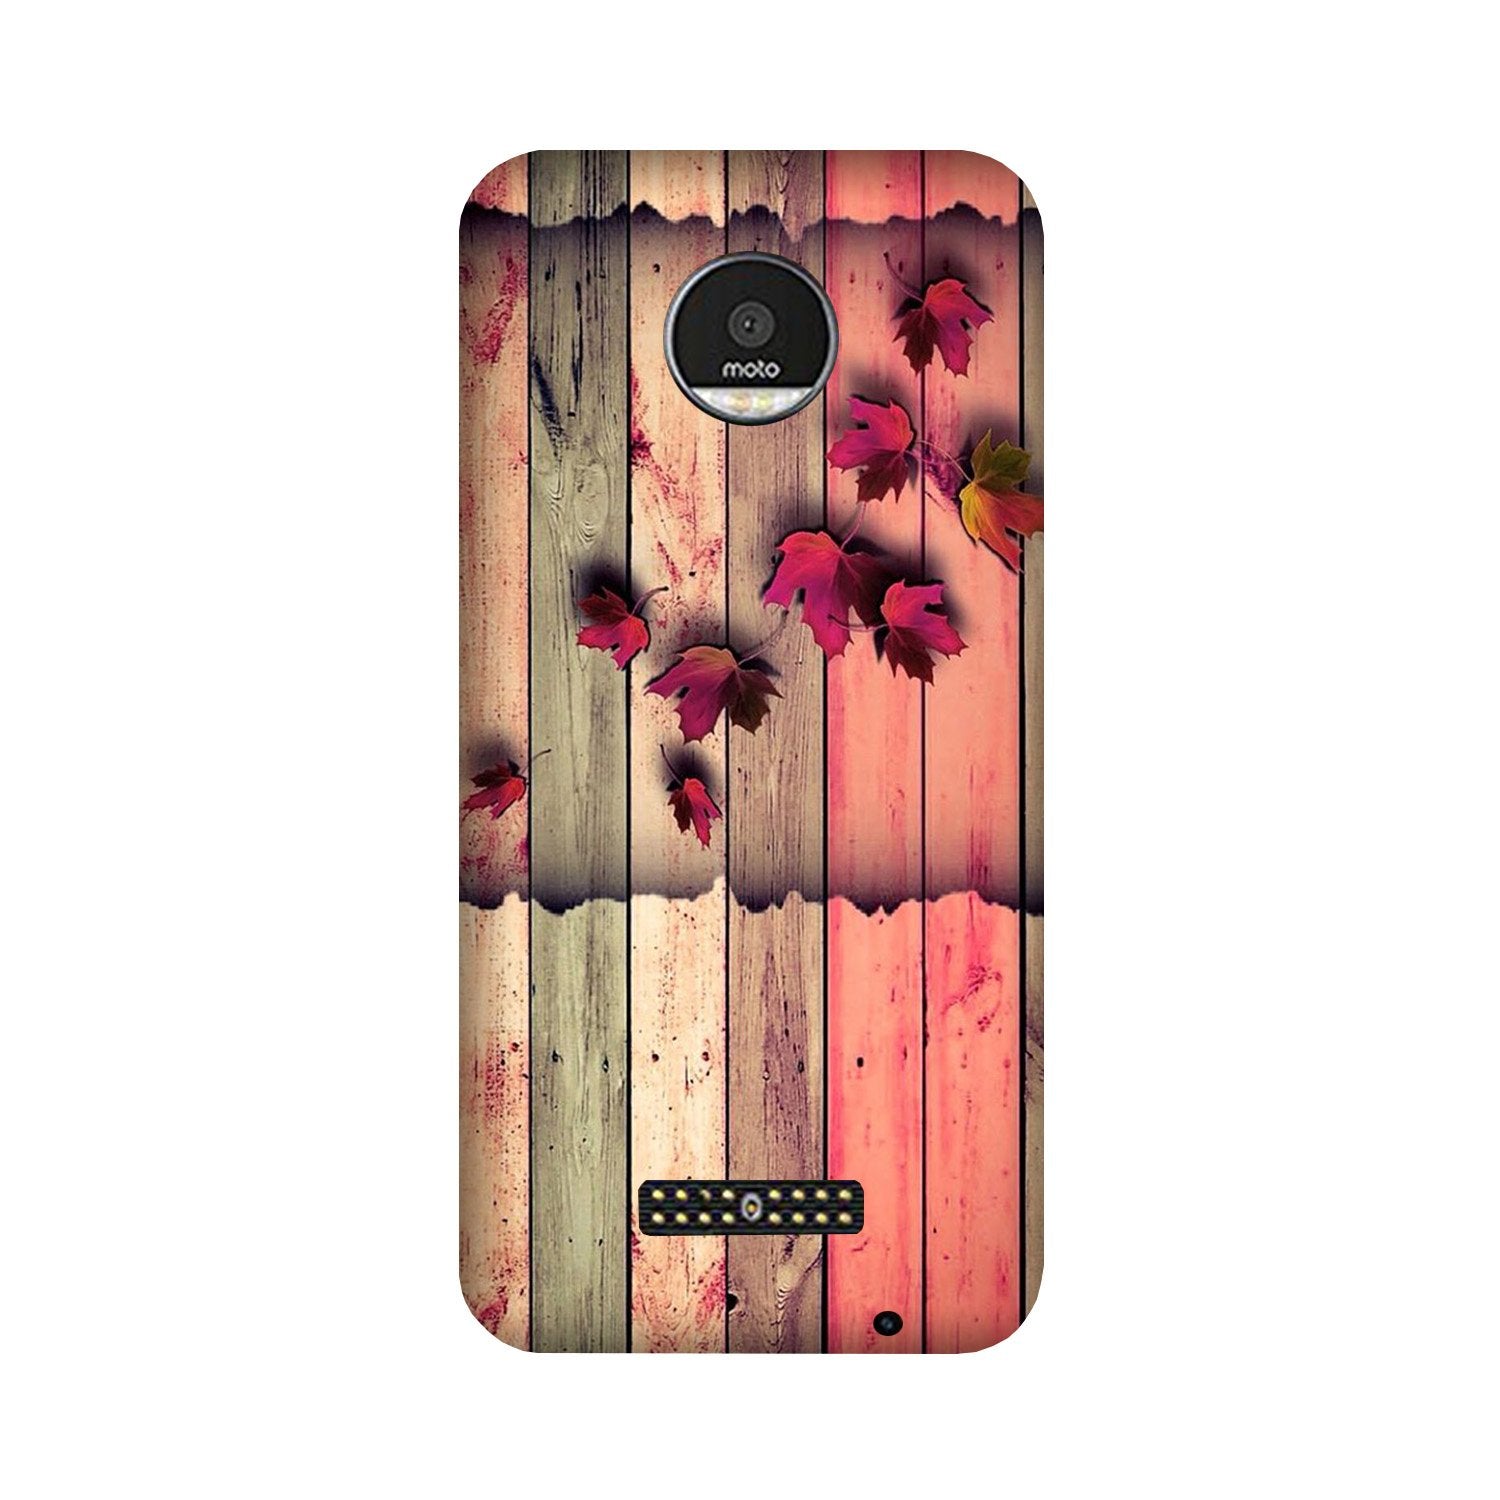 Wooden look2 Case for Moto Z Play